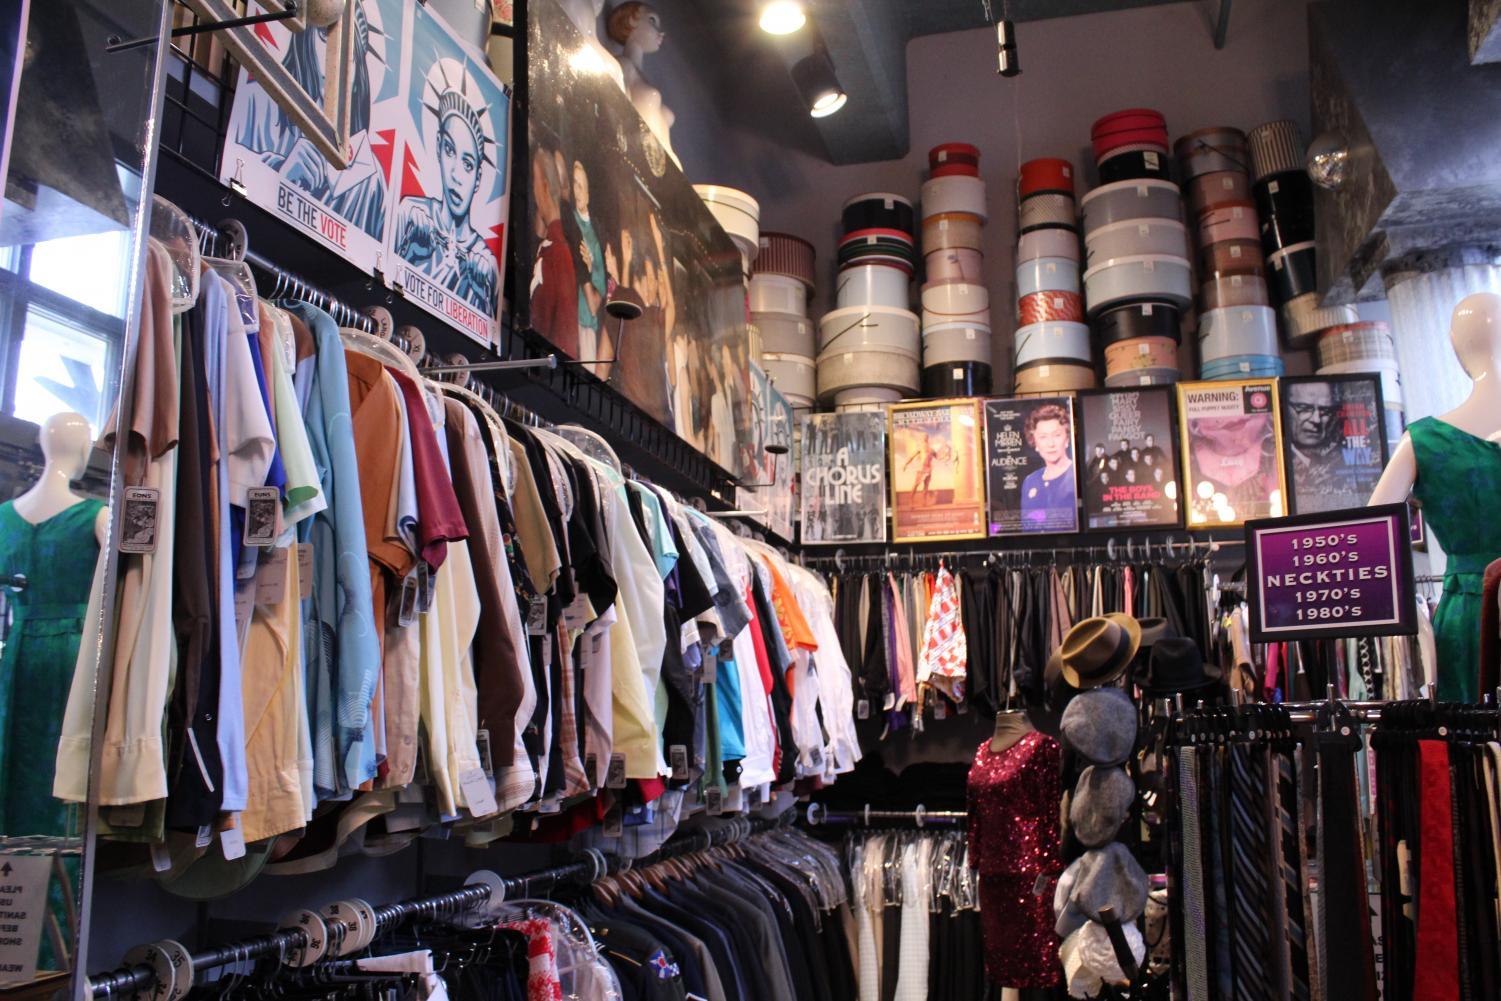 Pittsburgh vintage clothing stores preserve pieces from the past - The